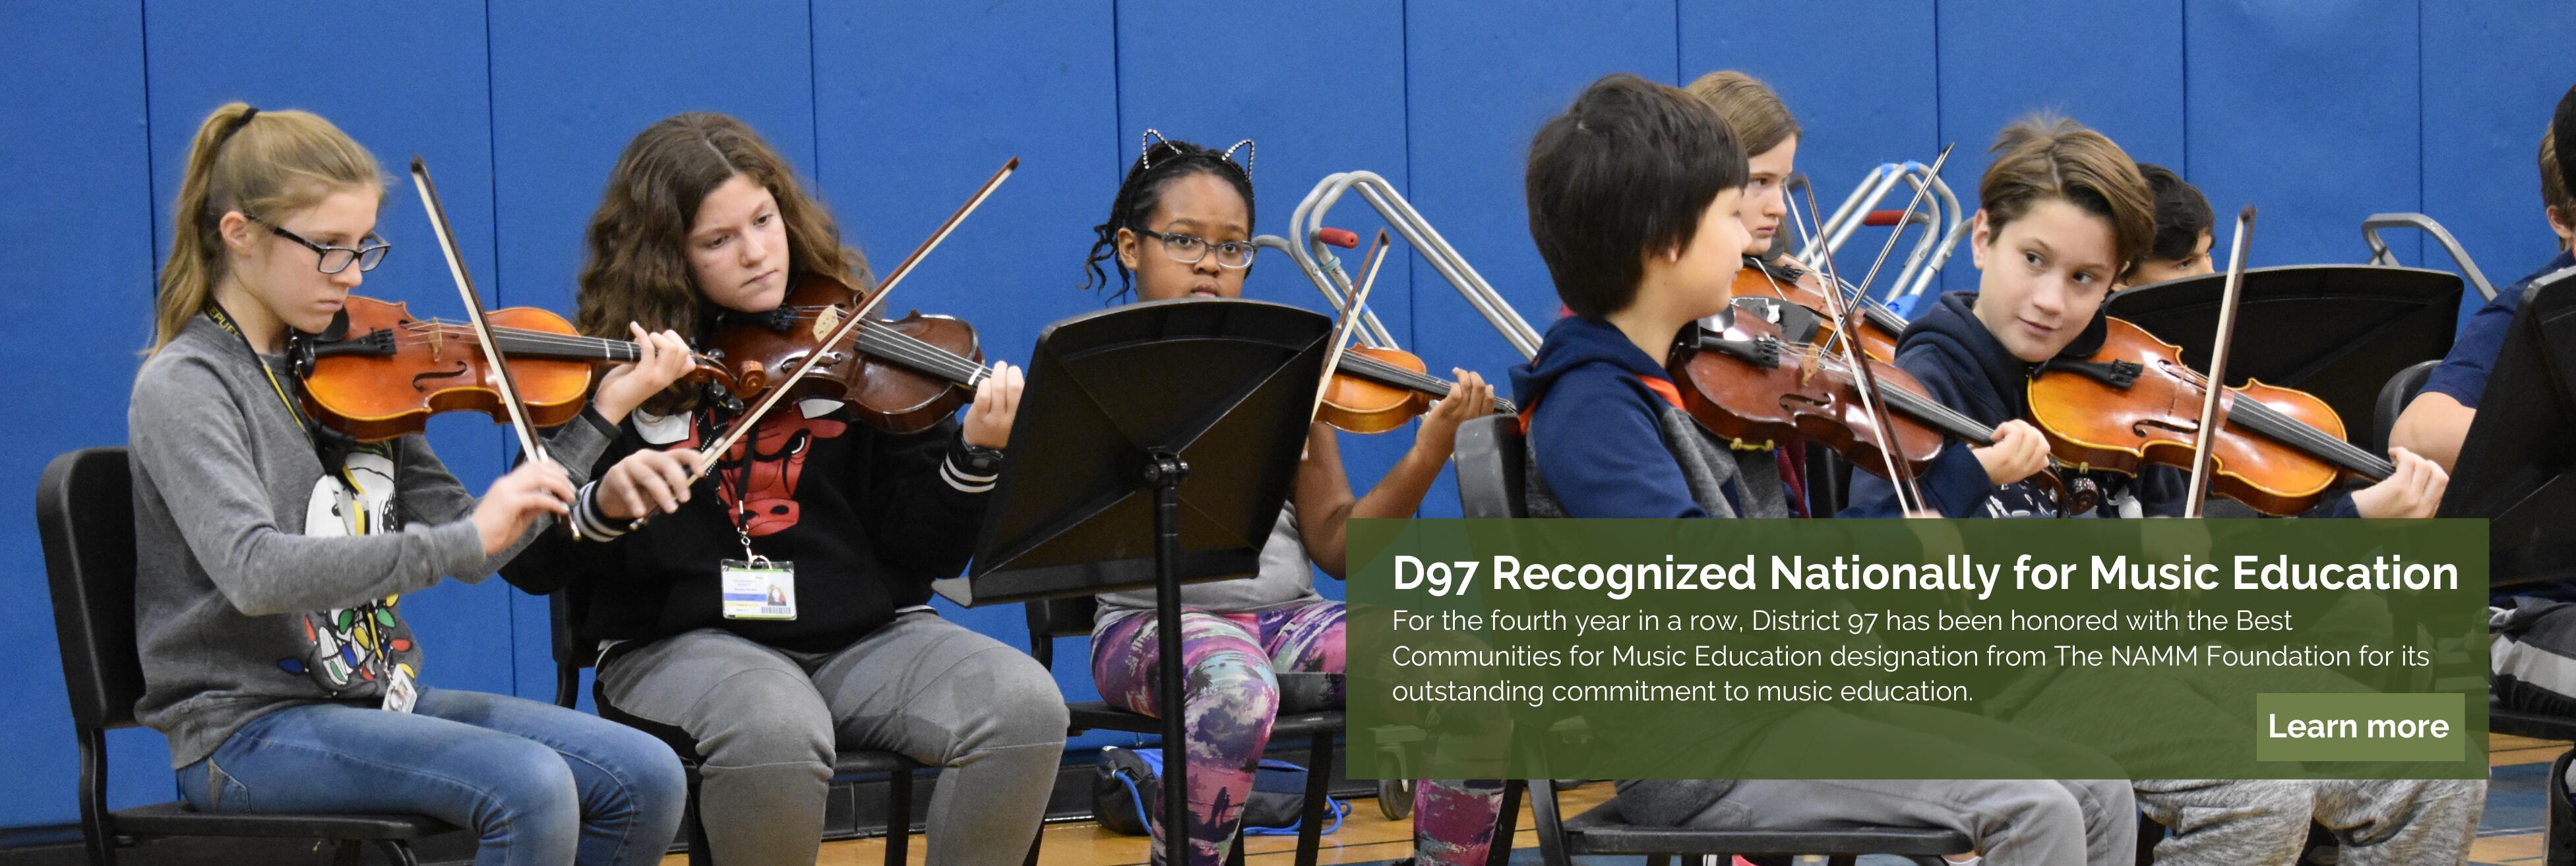 D97 Recognized Nationally for Music Education